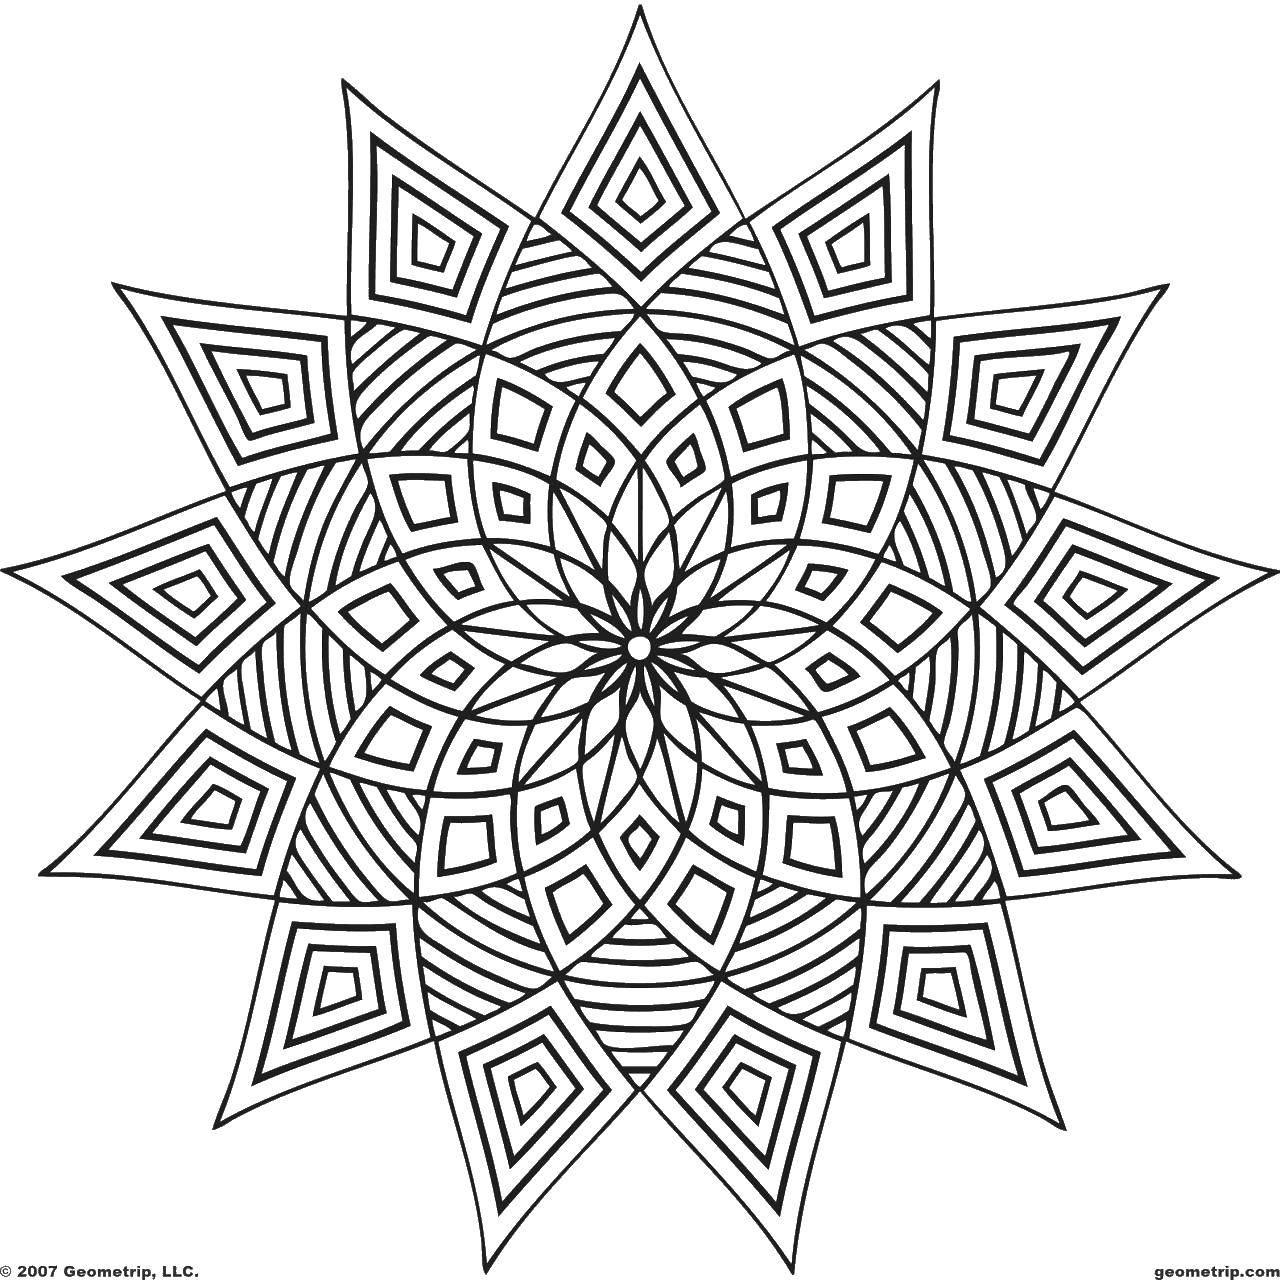 Coloring Patterned flower. Category Patterns with flowers. Tags:  Patterns, flower.